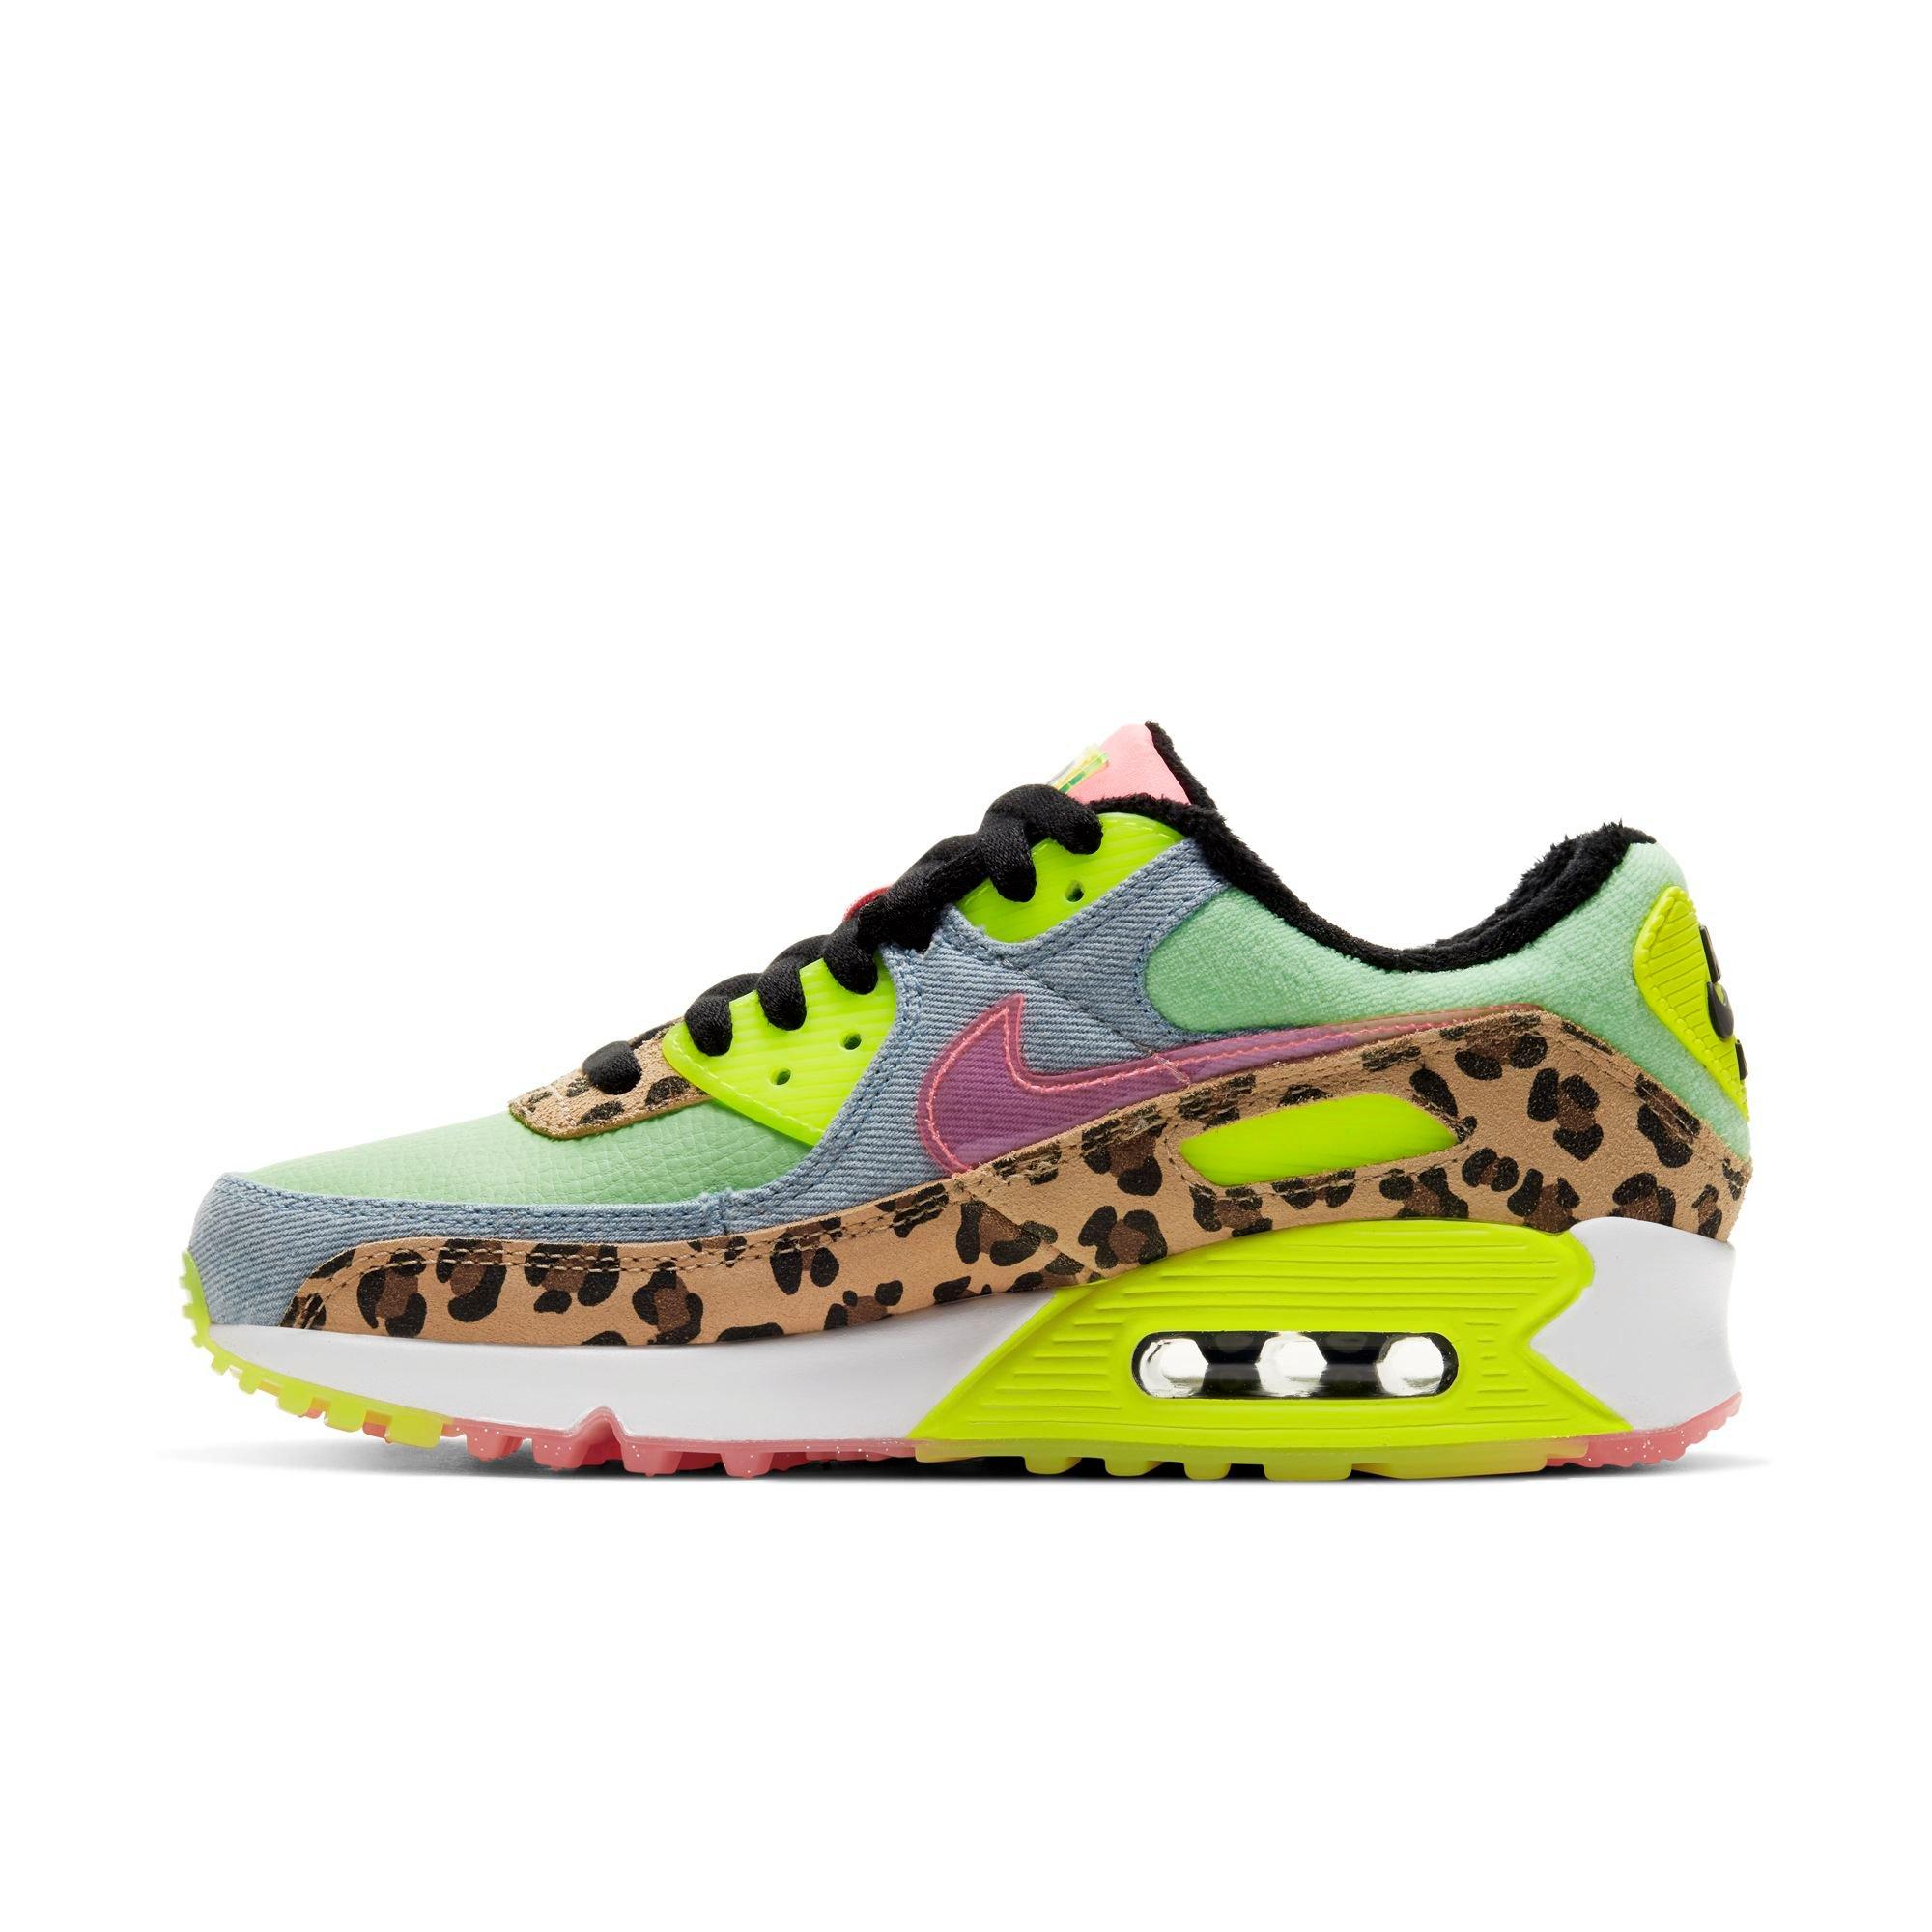 nike air max 90 trainers illusion green sunset pulse